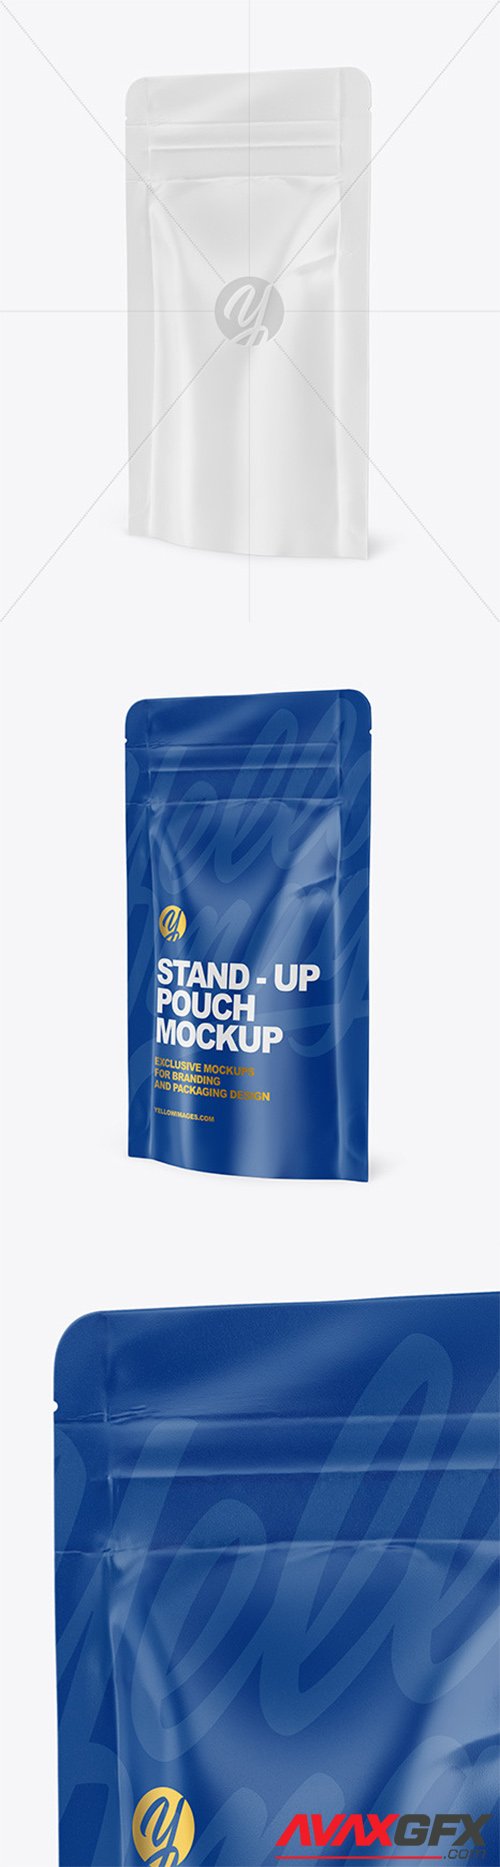 Glossy Stand-Up Pouch Mockup 81843